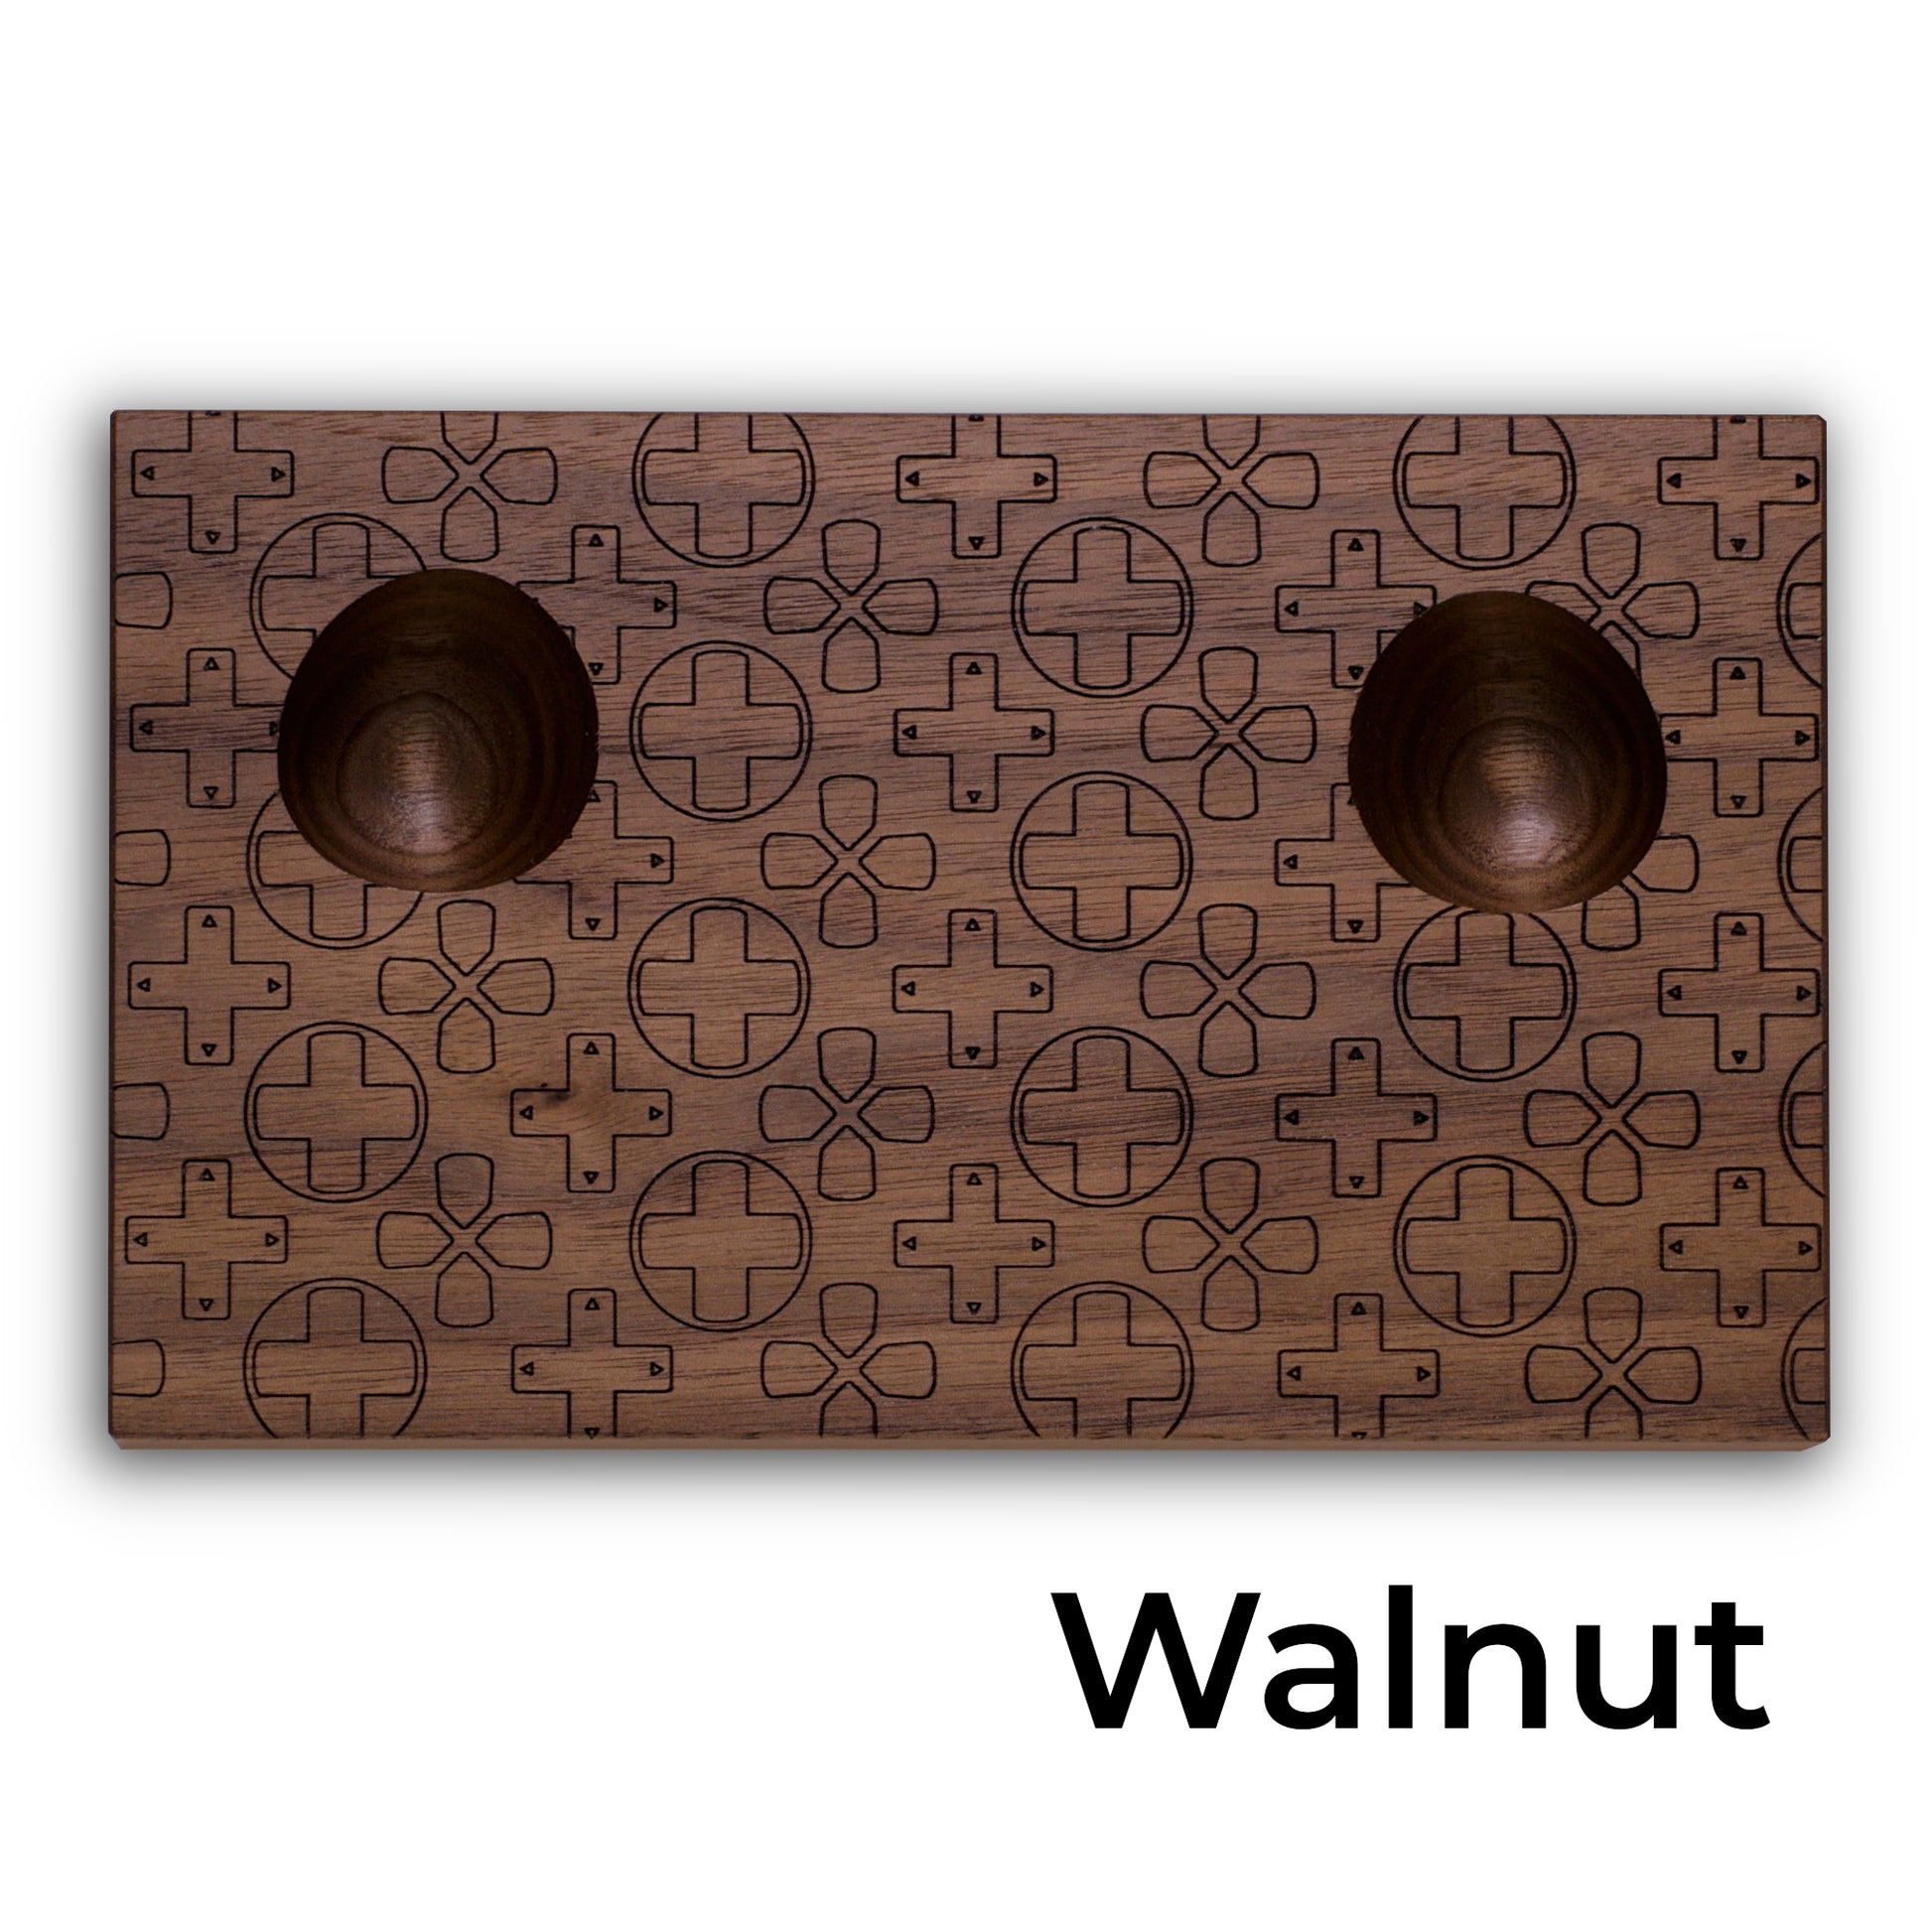 Xbox One Controller Stand in Walnut with D-pad design